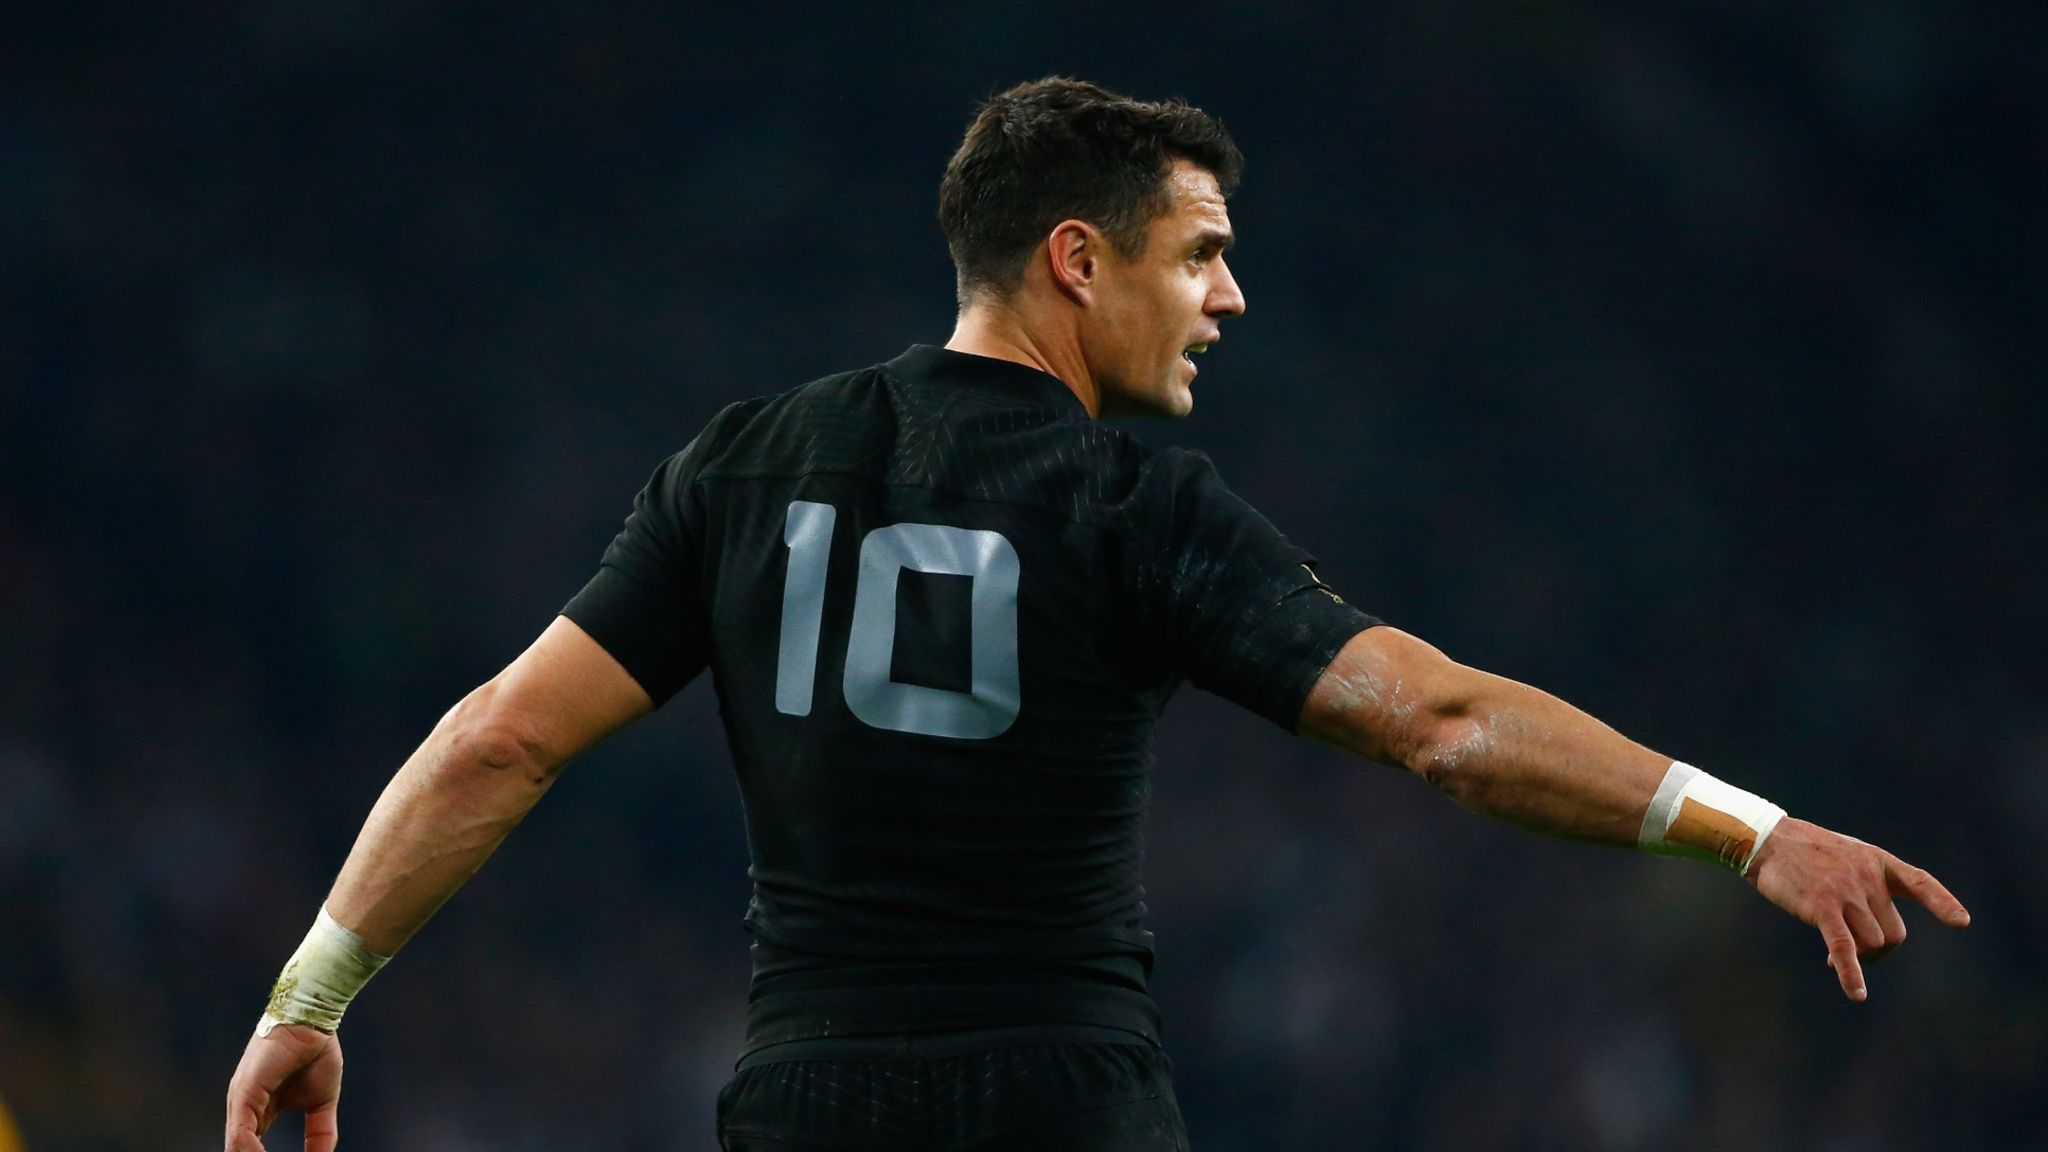 Dan Carter: Everything you need to know about legendary All Black fly-half  : PlanetRugby